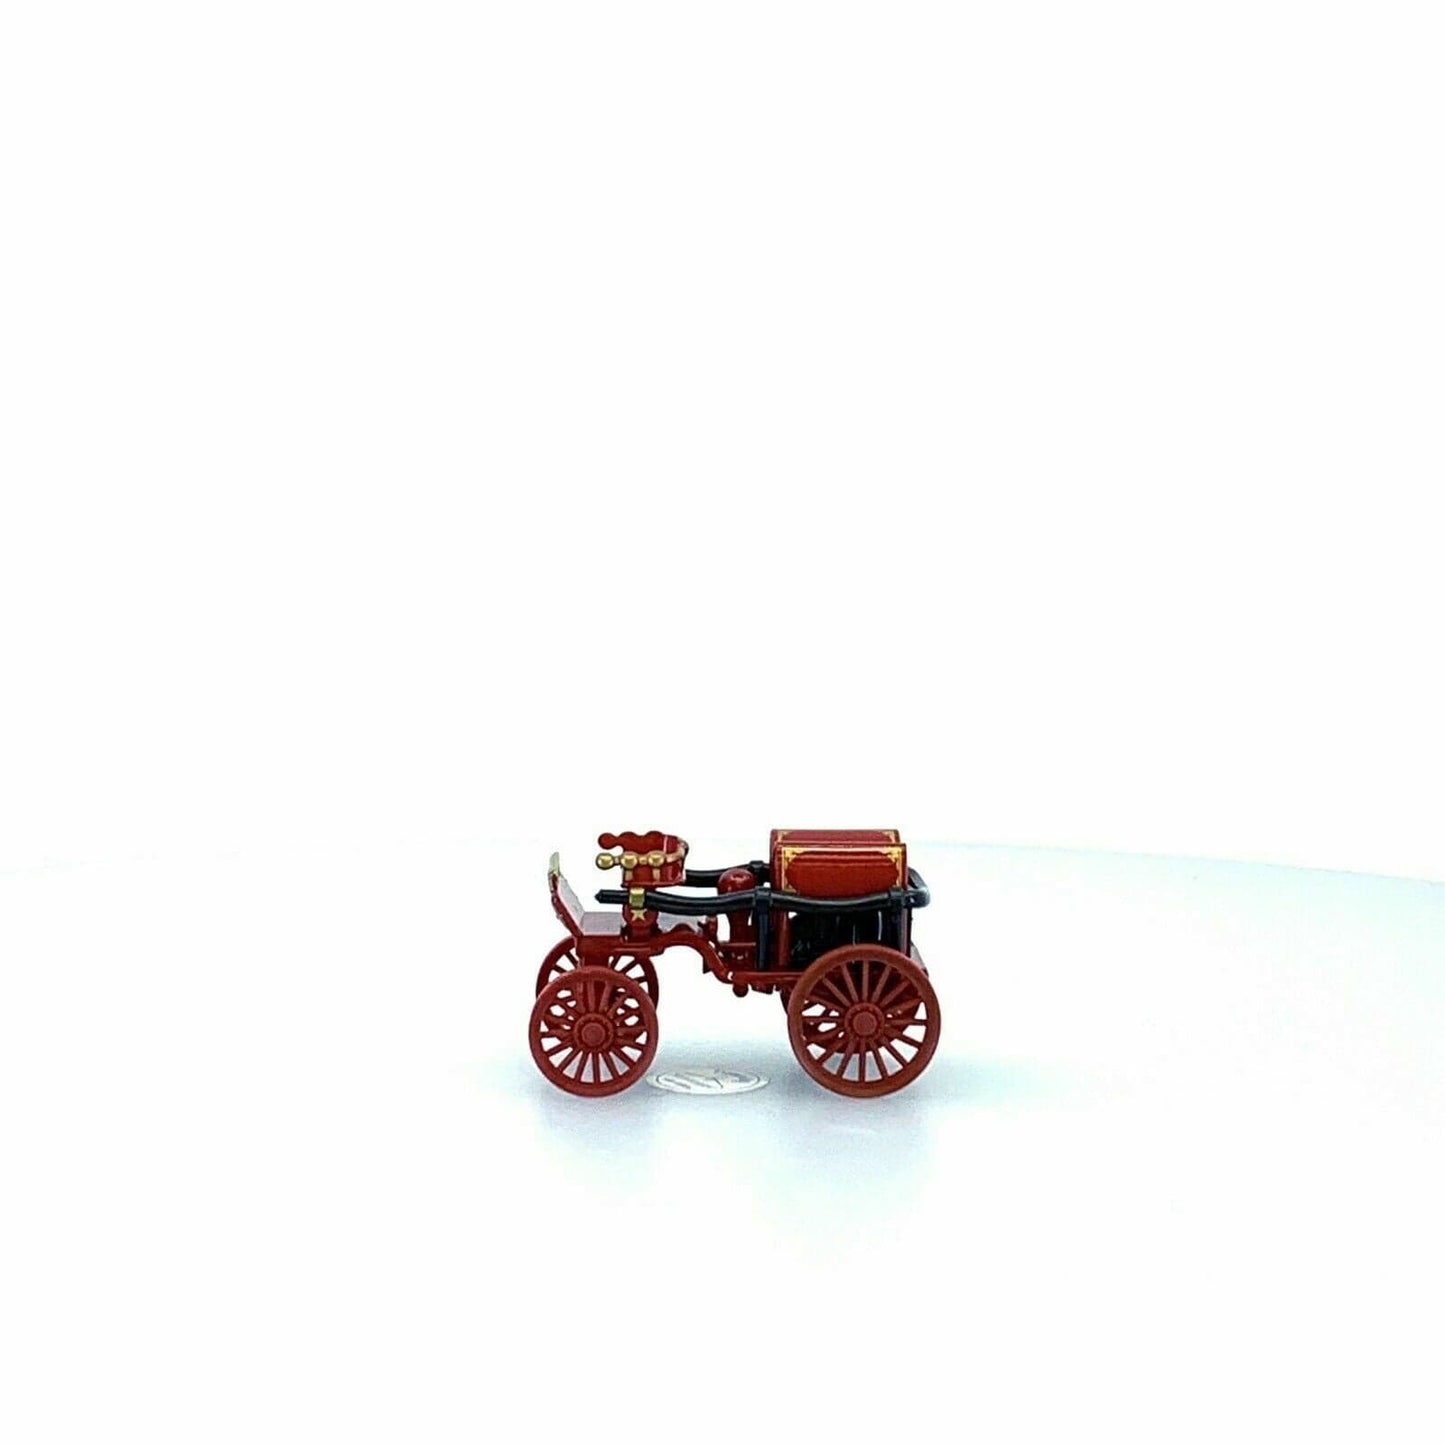 Vintage-inspired Readers Digest Fire Truck Horse Drawn Pumper - Red, 1:64 - Very Good